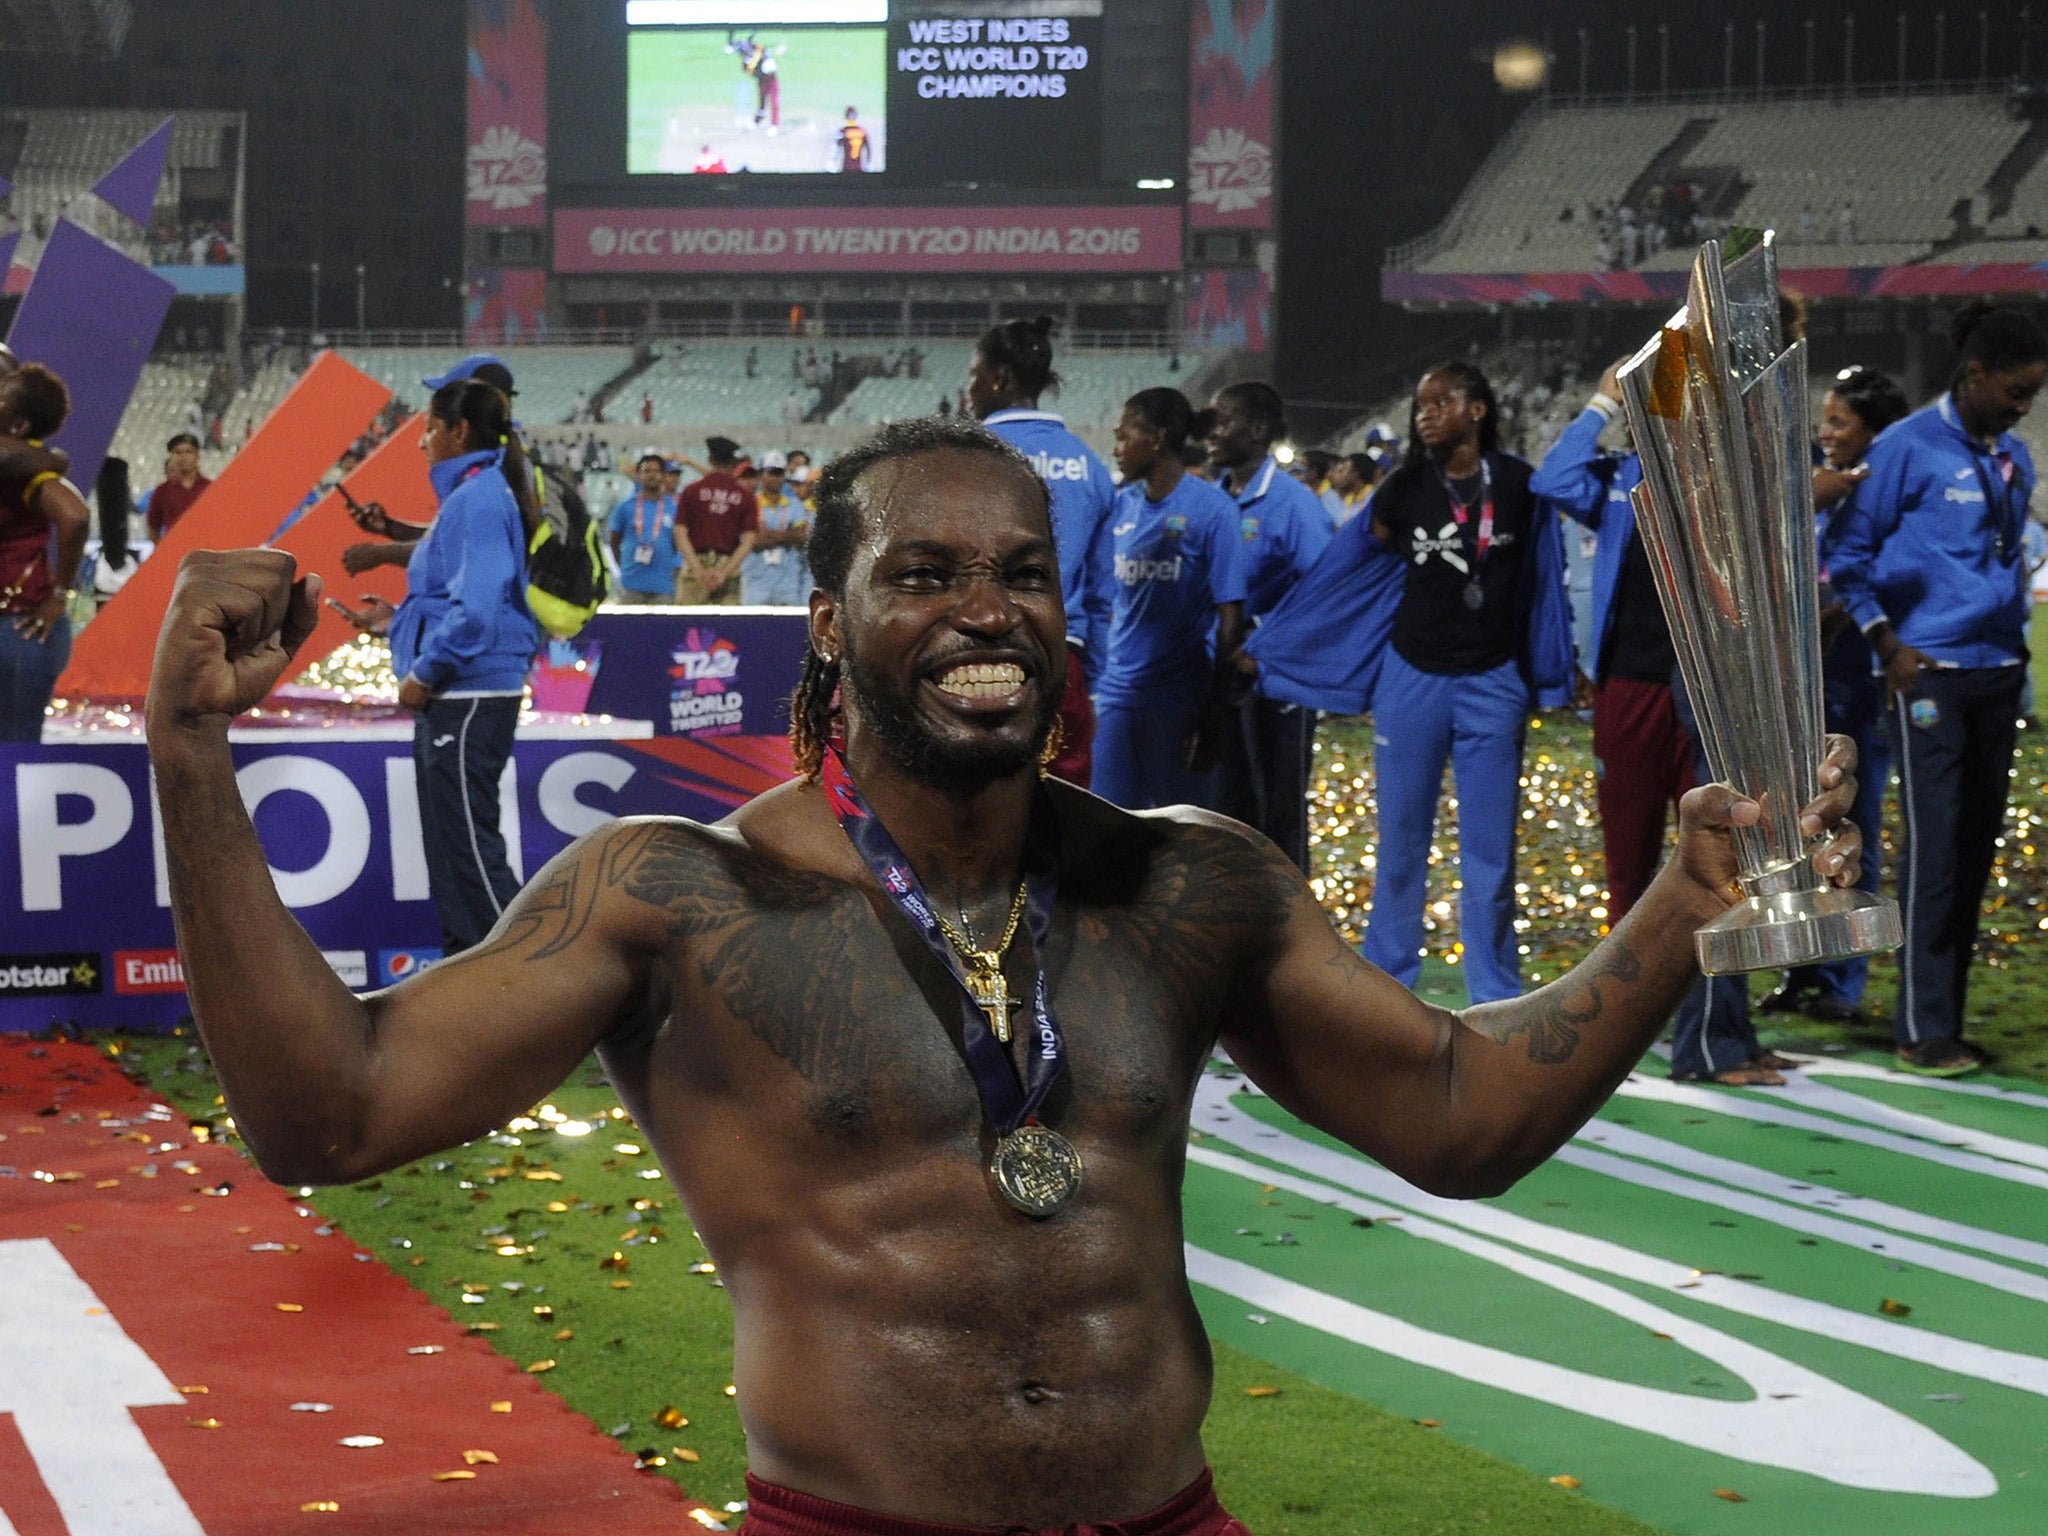 Chris Gayle: West Indies cricketer asks female journalist how many black  men she has slept with in latest interview | The Independent | The  Independent